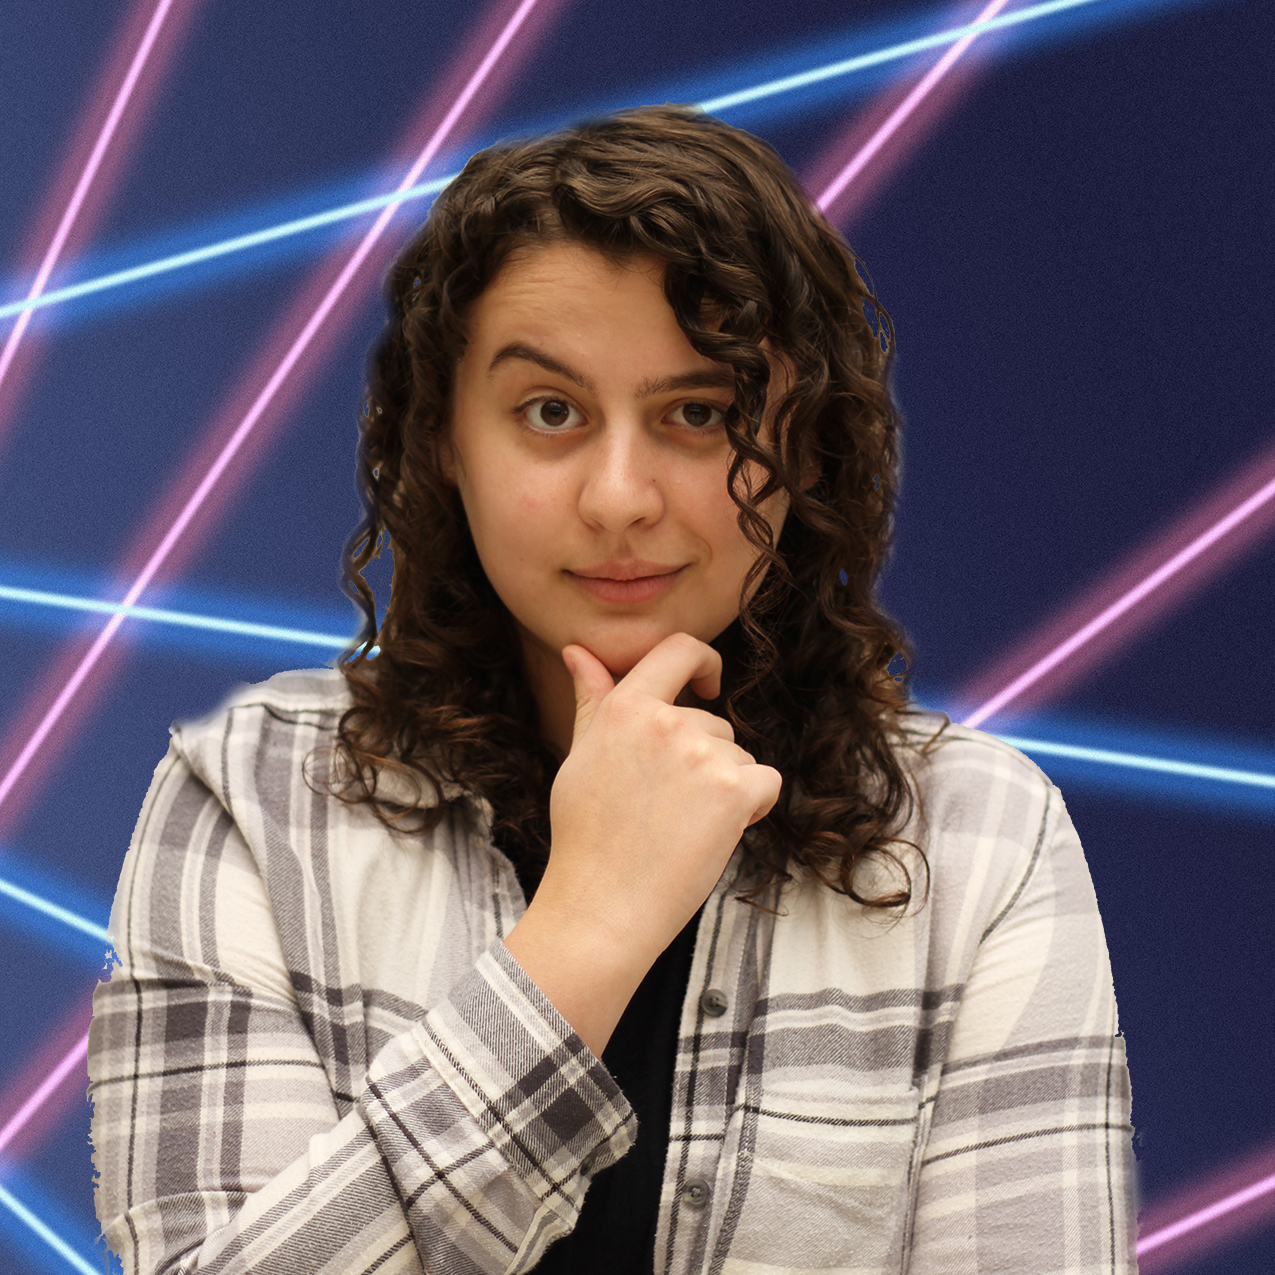 Ilana in front of laser background